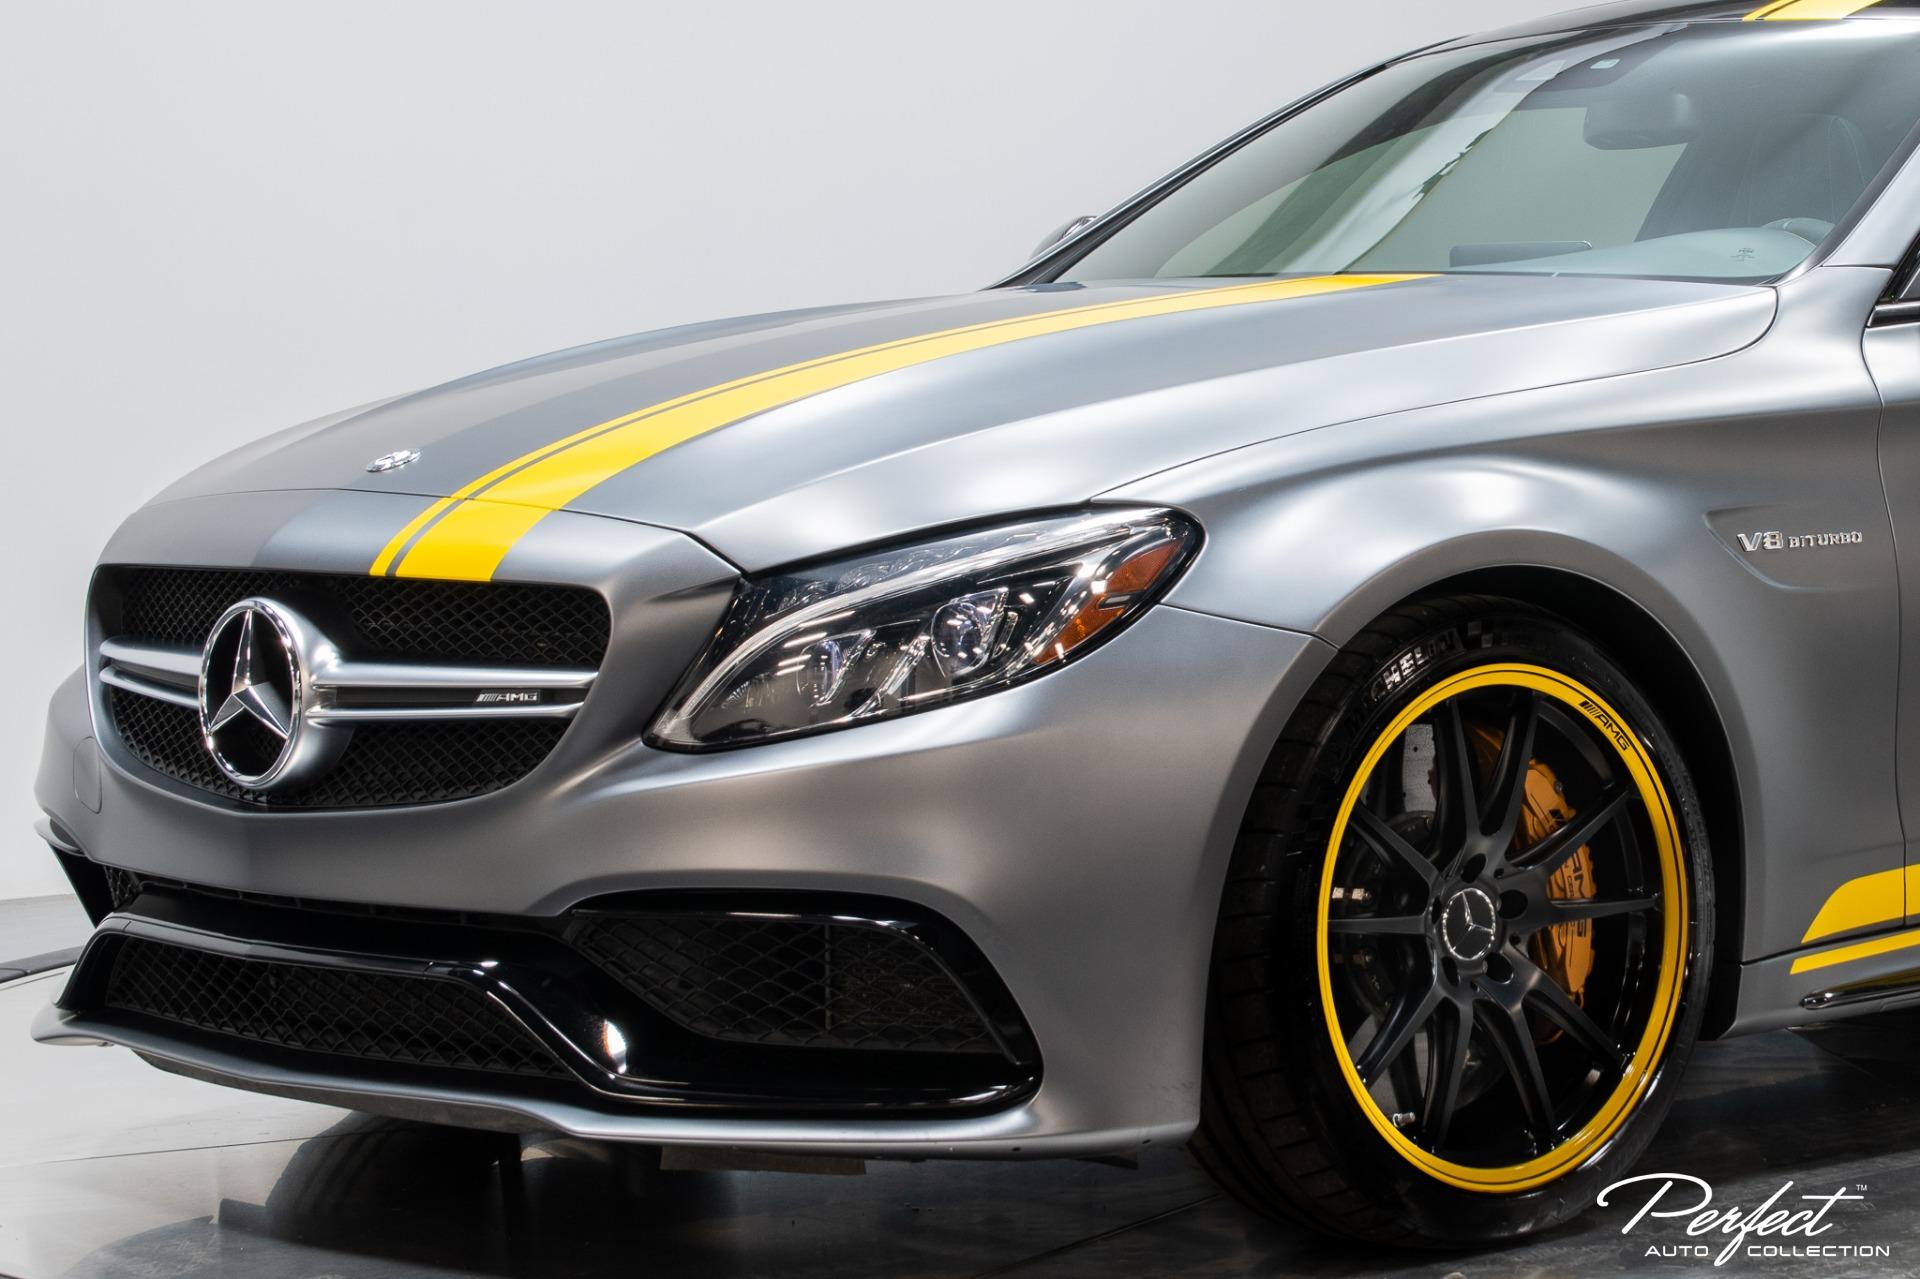 E63 AMG with a nice V8 Biturbo and yellow brake calipers : r